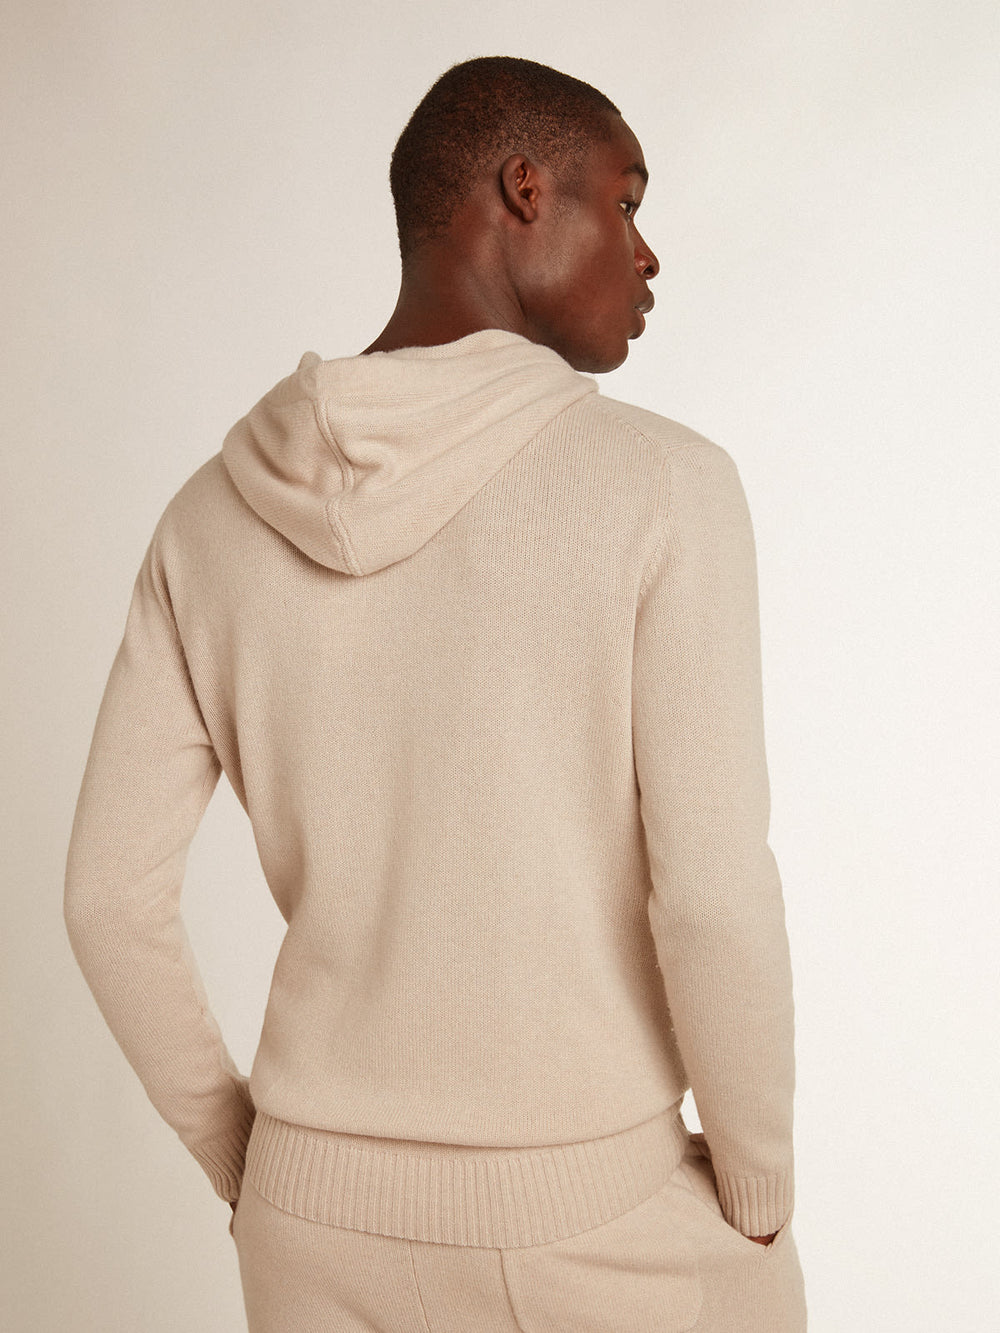 Men's Knit Hoodie Cashmere Wool Natural White